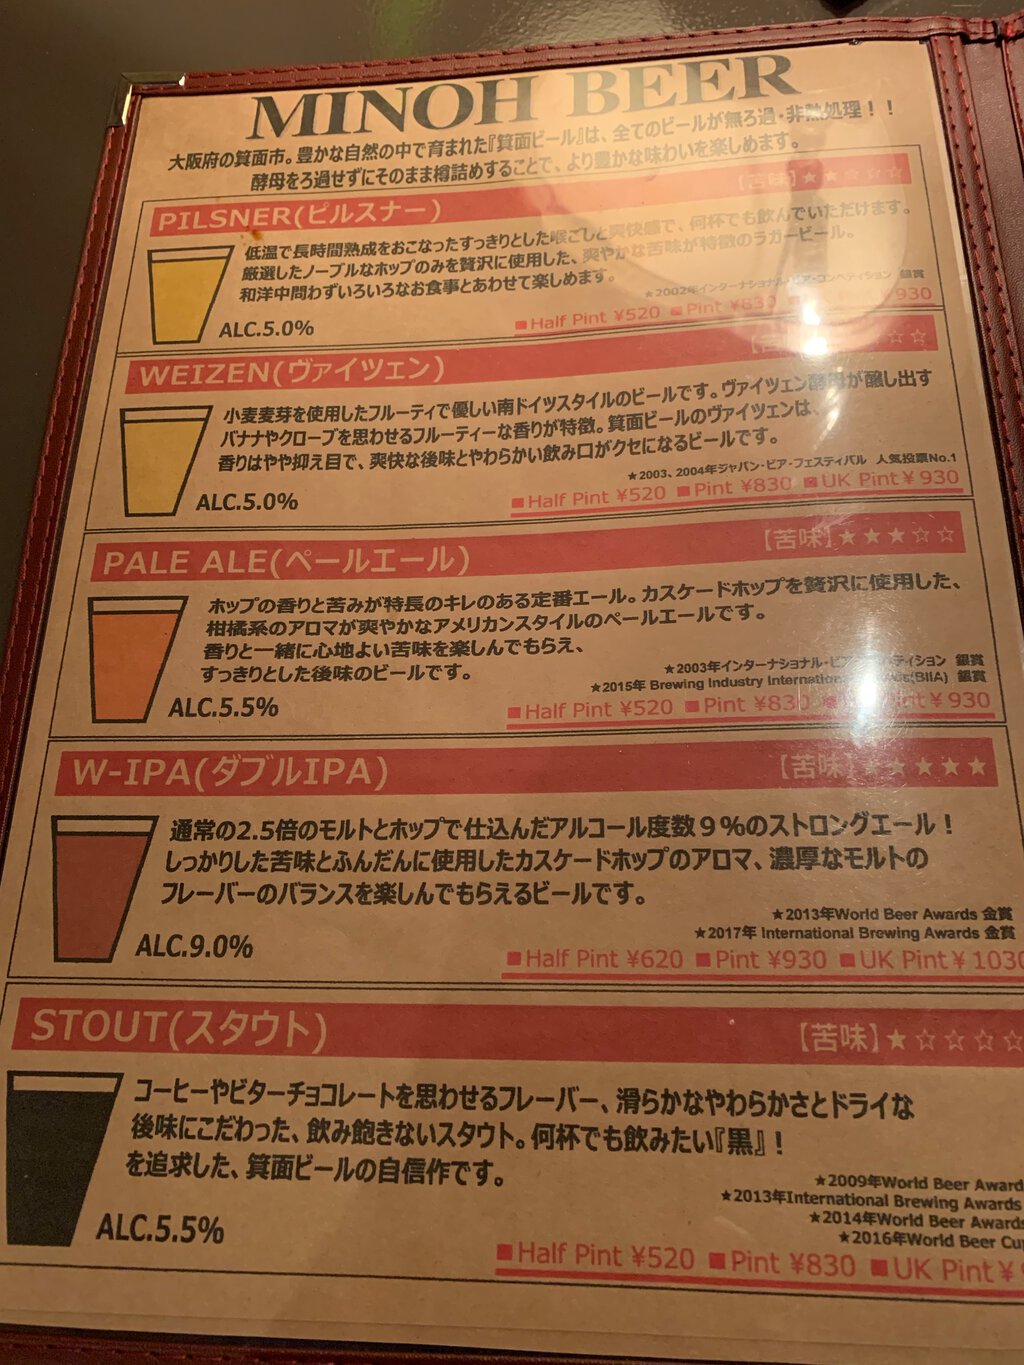 First page of the Beer Belly / Minoh Menu, Osaka